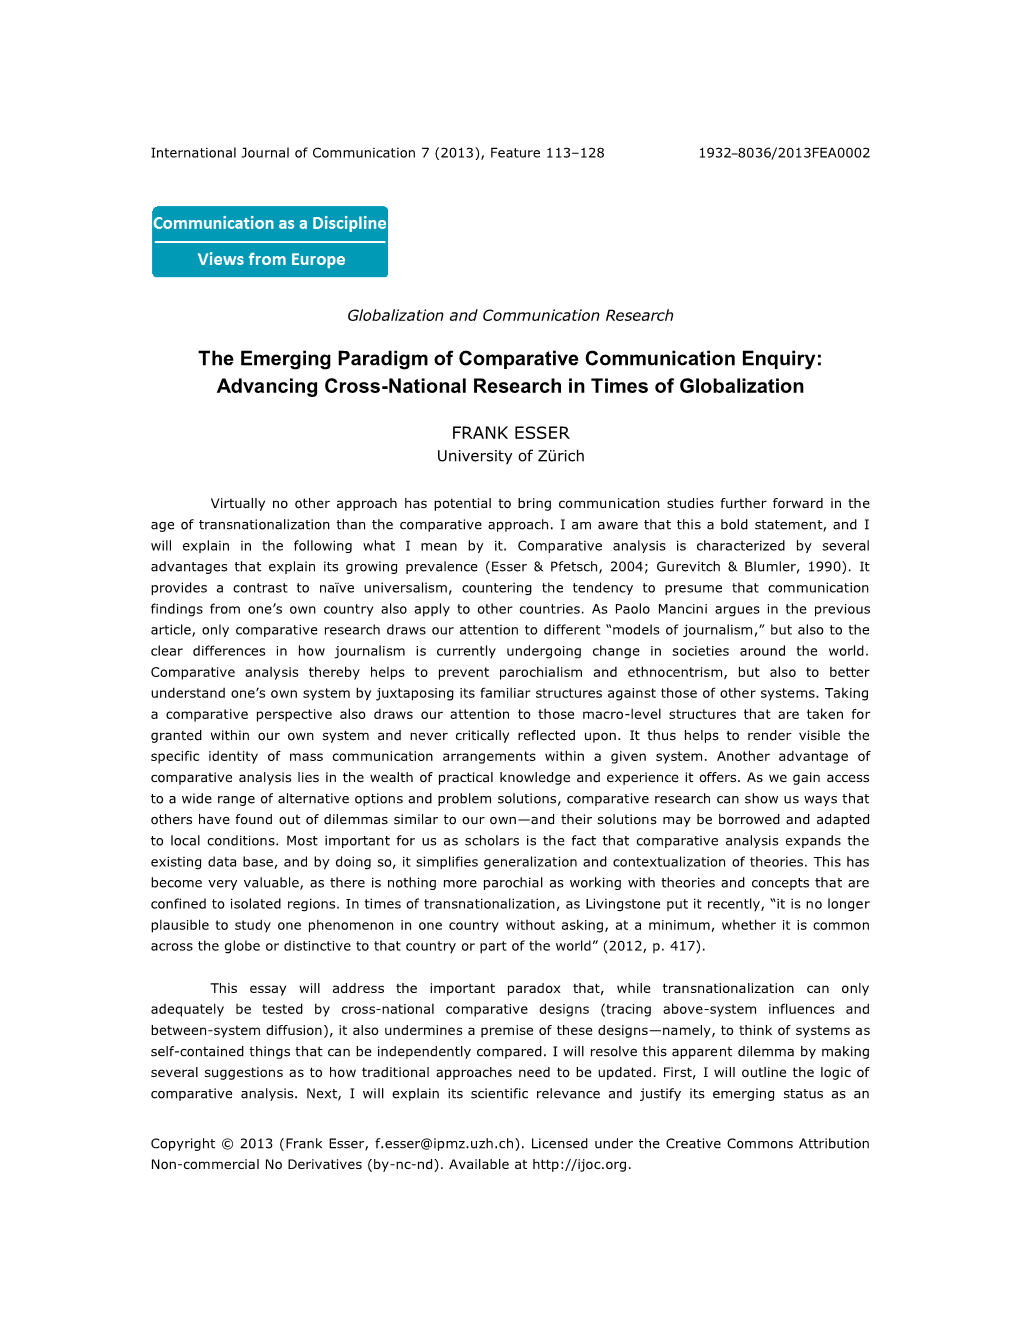 The Emerging Paradigm of Comparative Communication Enquiry: Advancing Cross-National Research in Times of Globalization